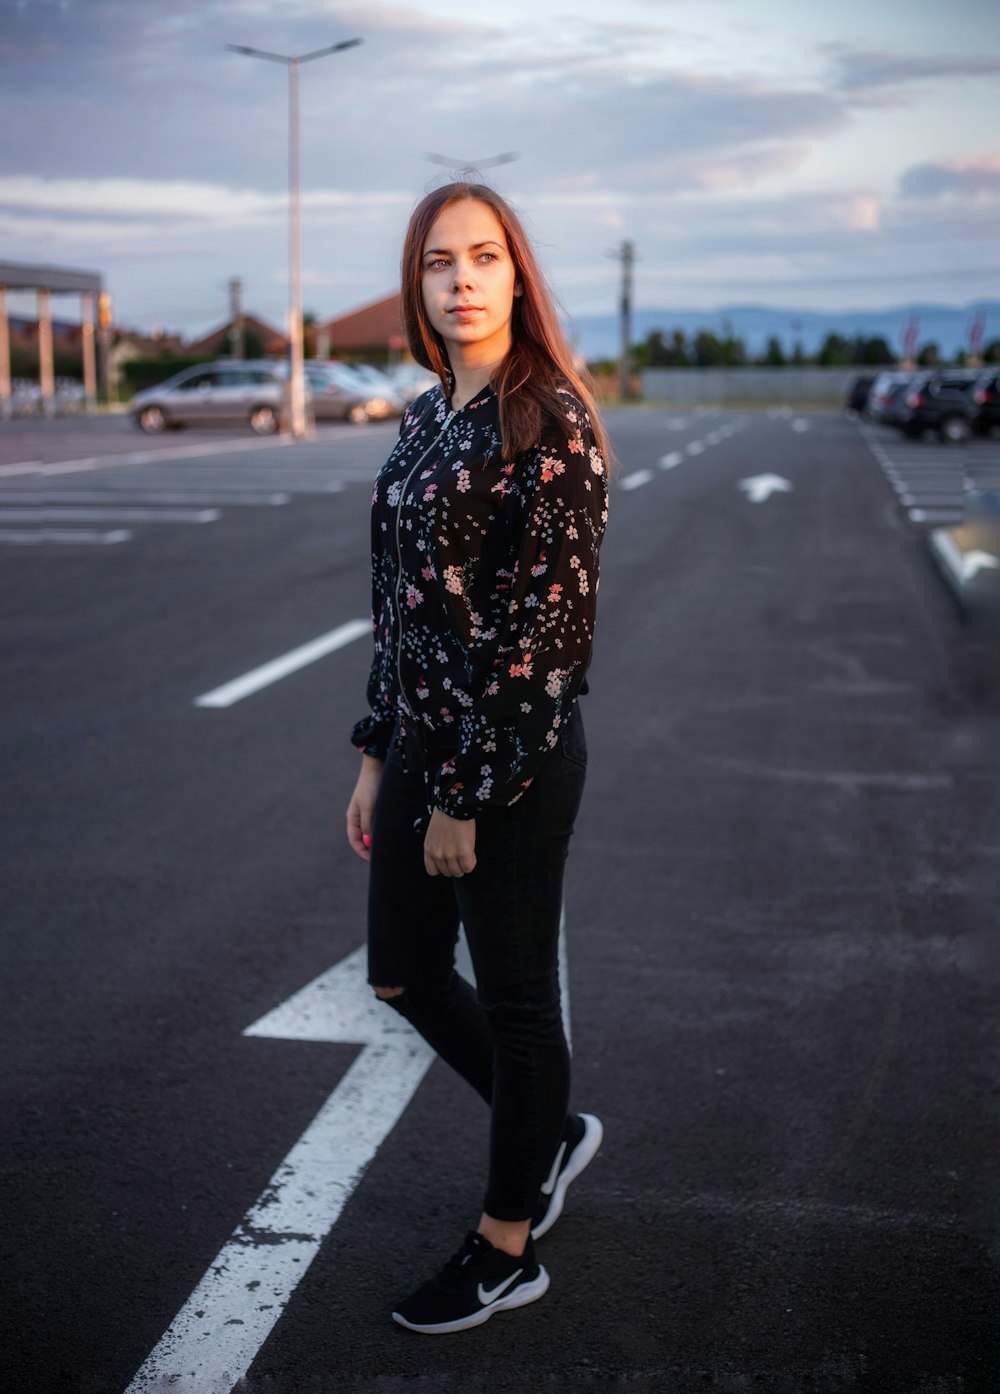 woman in black and white floral long sleeve shirt and black pants standing on road during